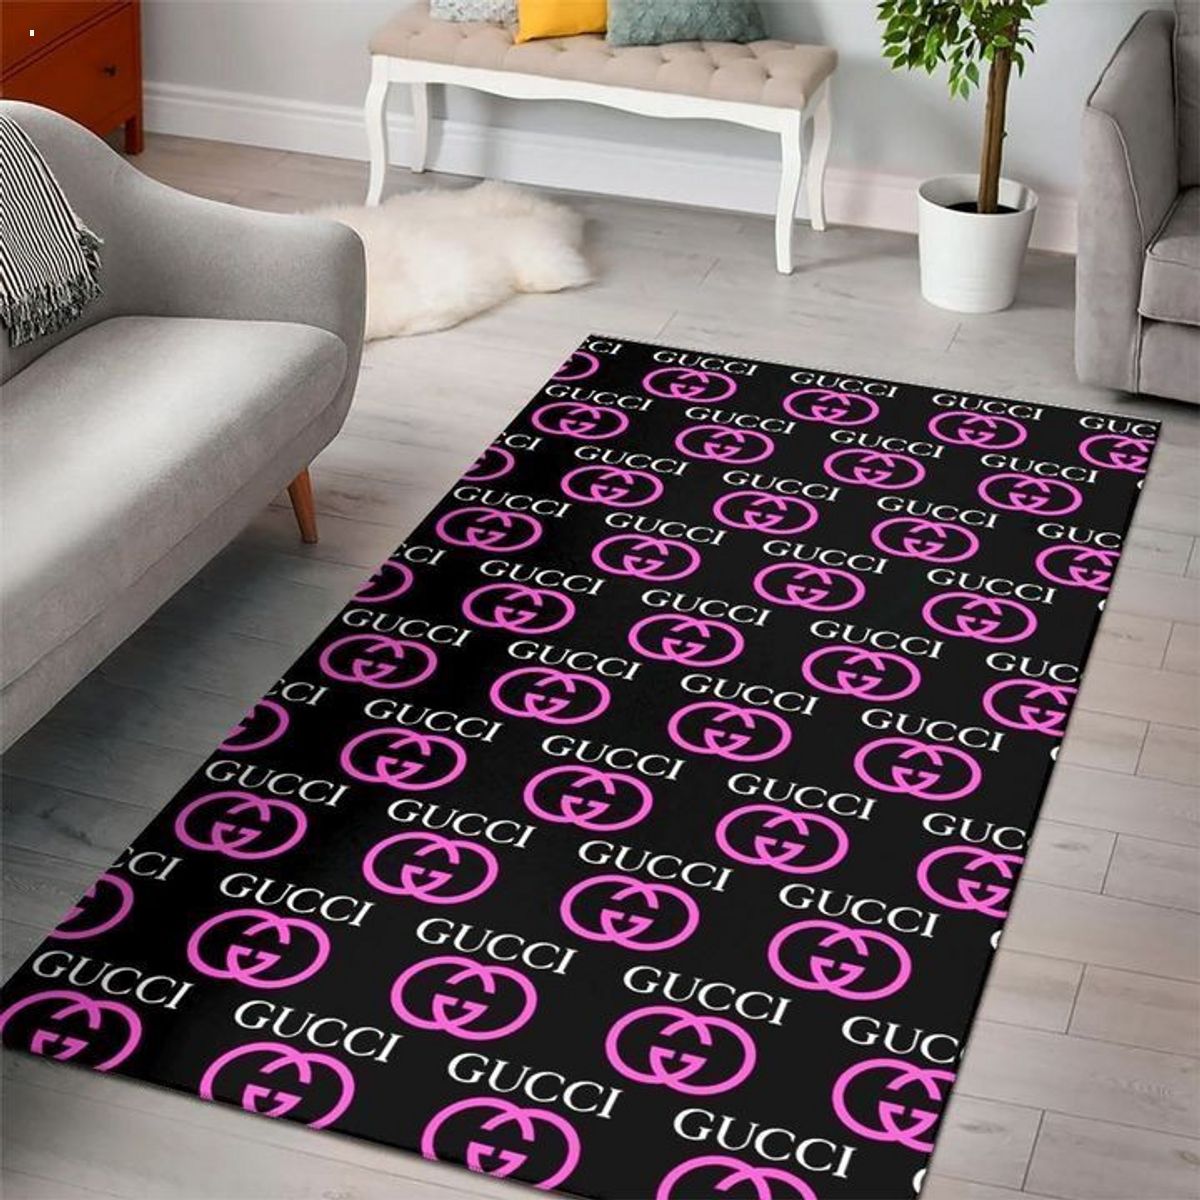 Gucci Black Mix Pink  For Living Room Bedroom Luxury Brand Carpet Rug Limited Edition